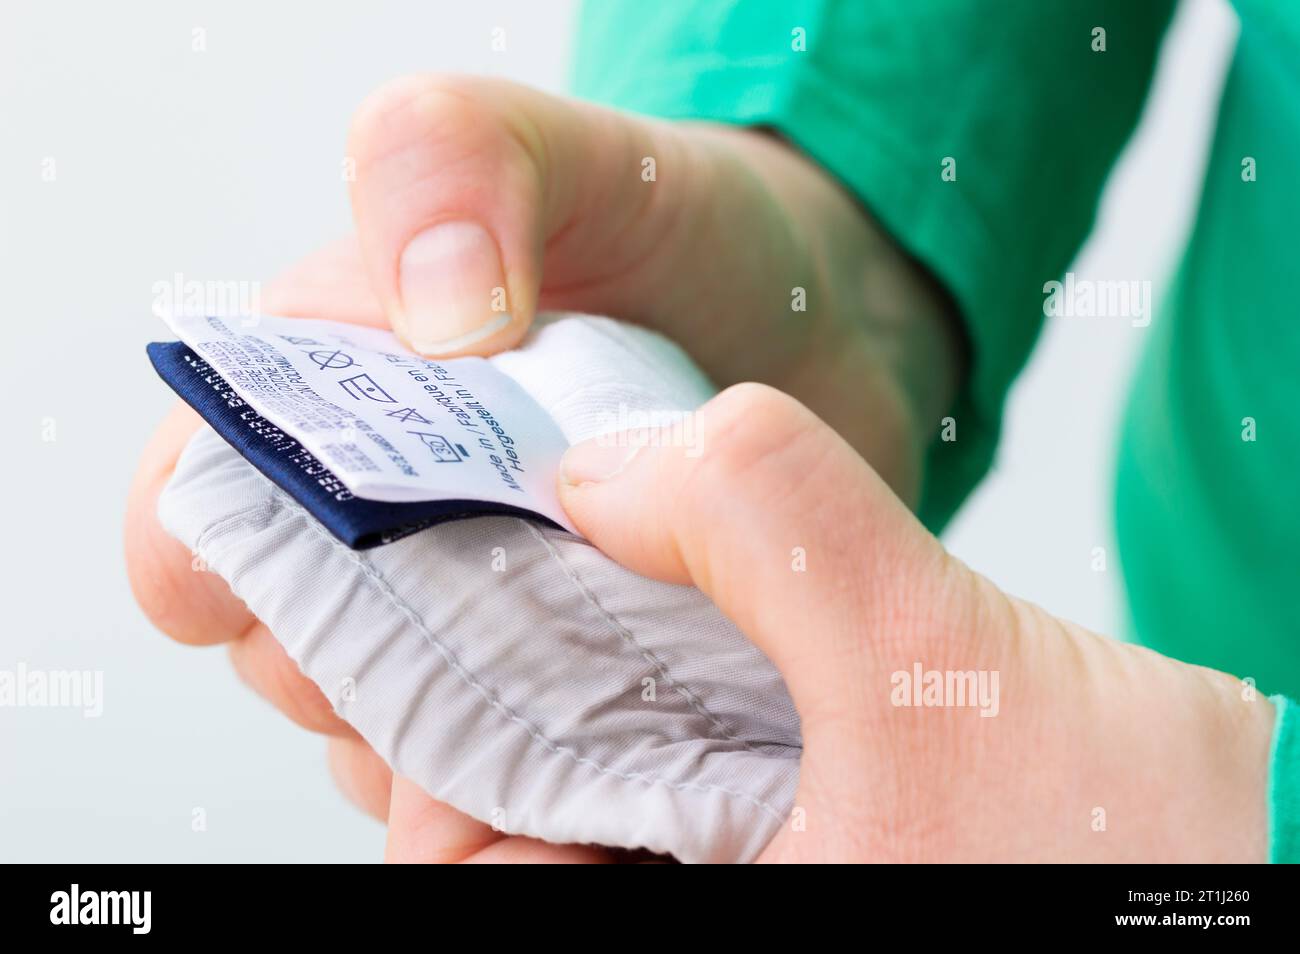 Close-up of person reading the clothing label showing washing instructions at home. Stock Photo